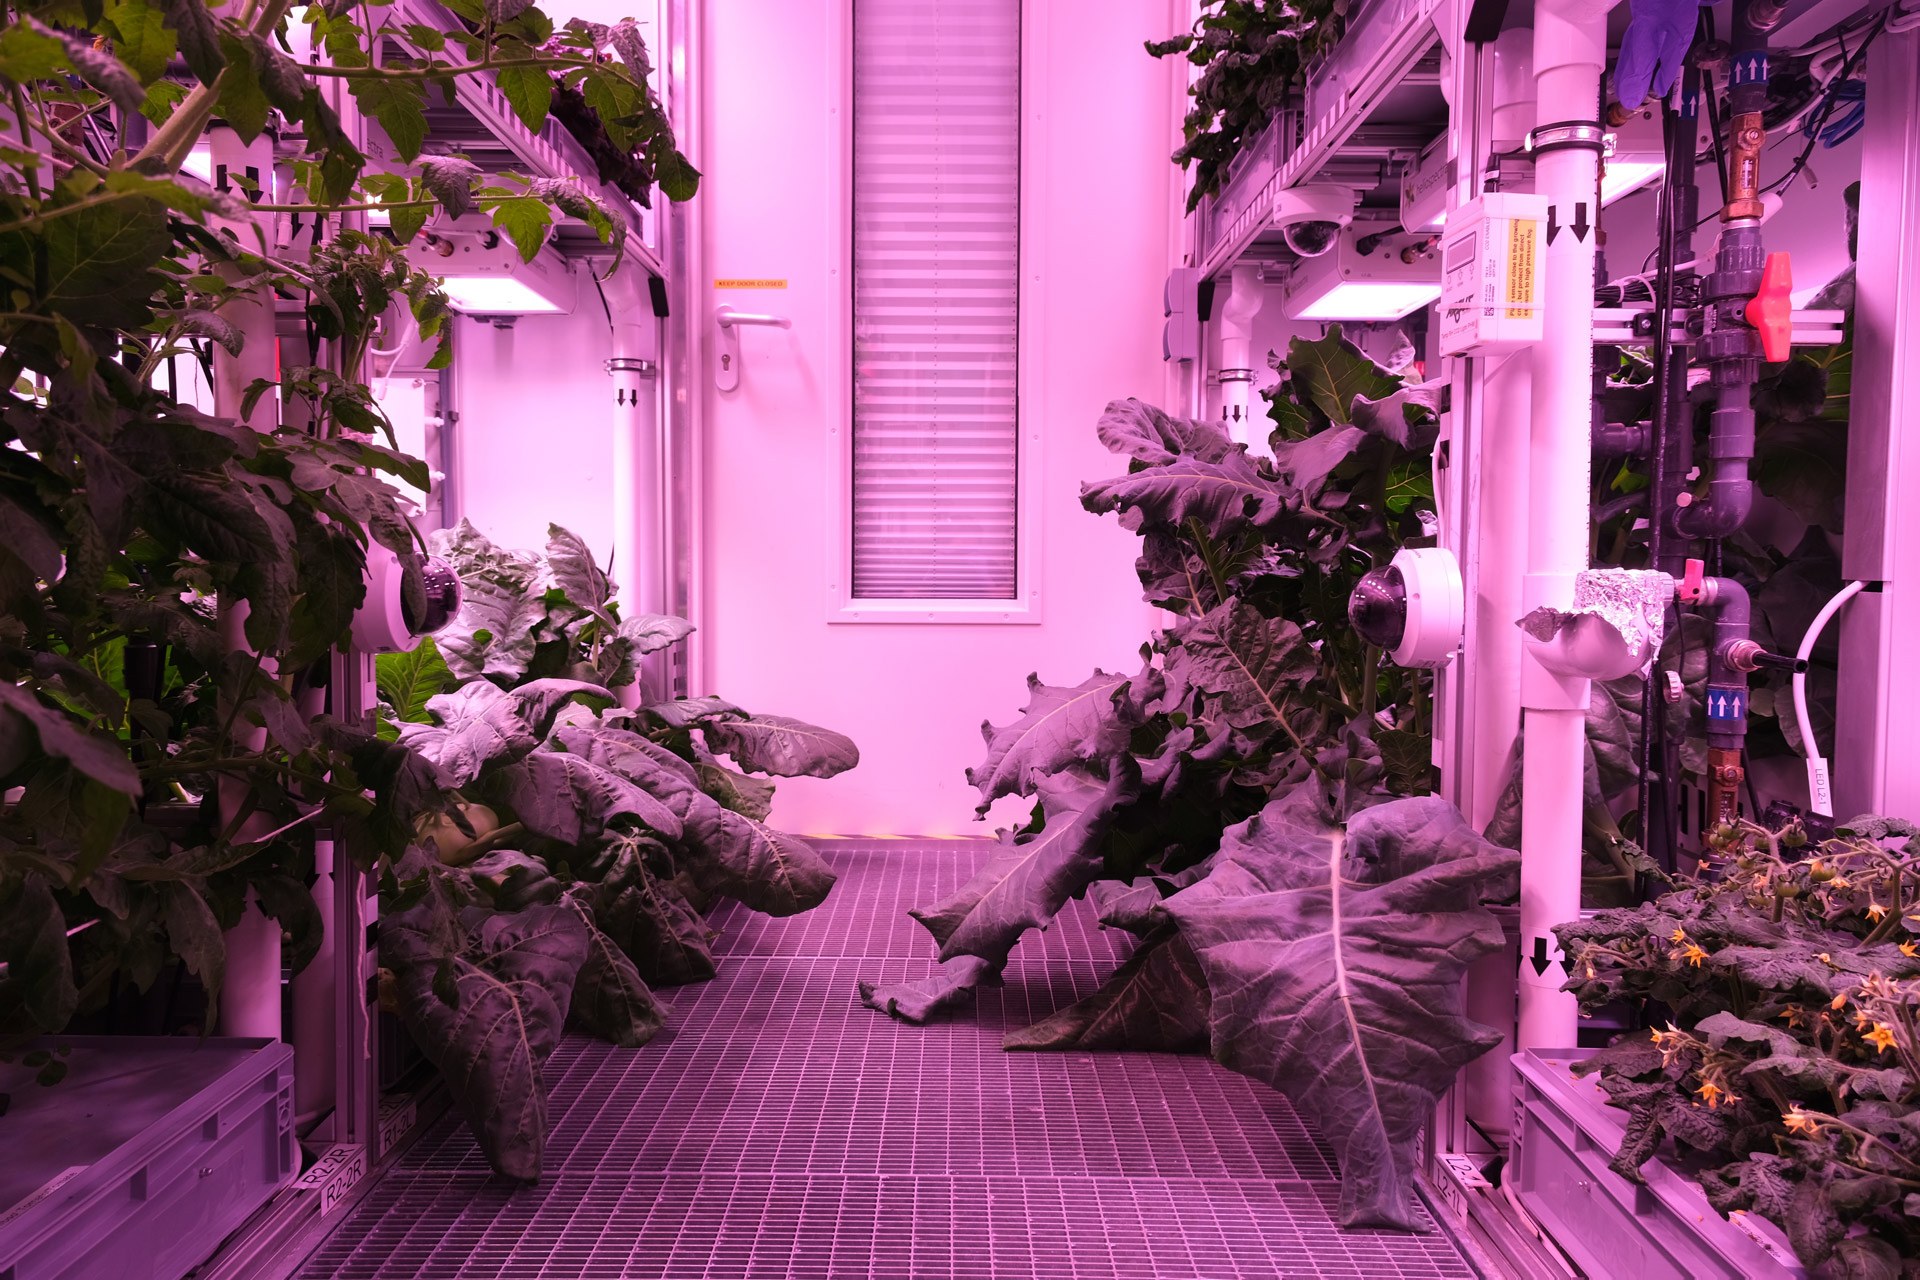 Kohlrabi (left) and broccoli (right) in the EDEN ISS Antarctic greenhouse